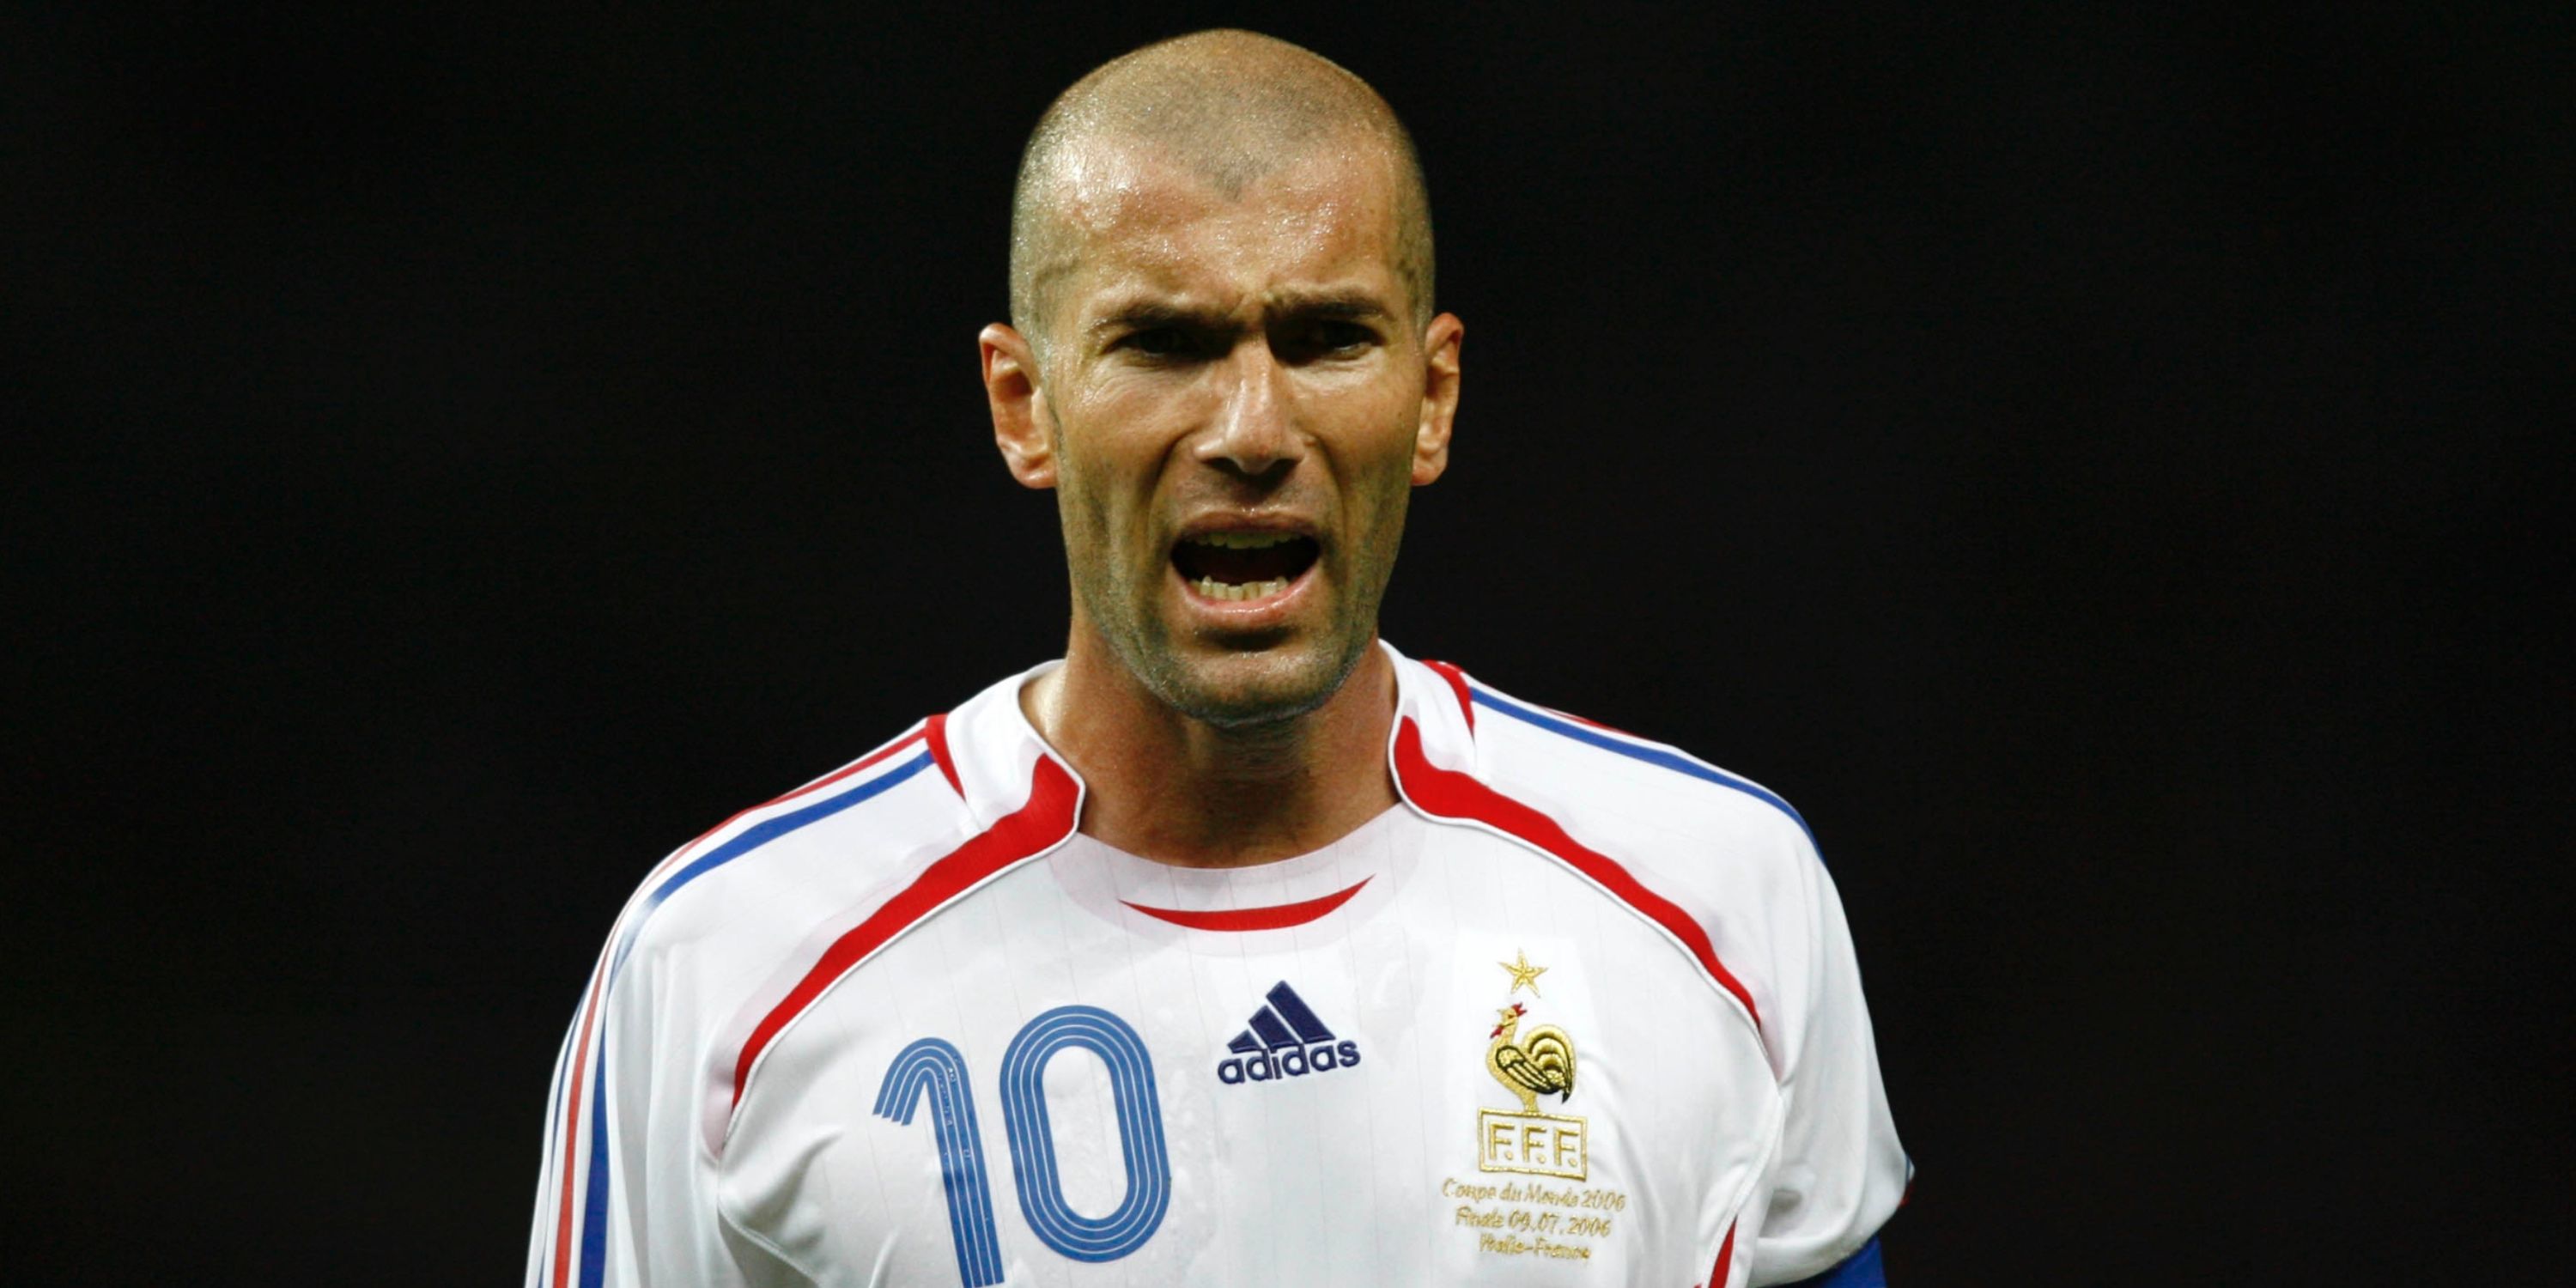 Zinedine Zidane reveals his toughest opponent in chat with Lionel Messi